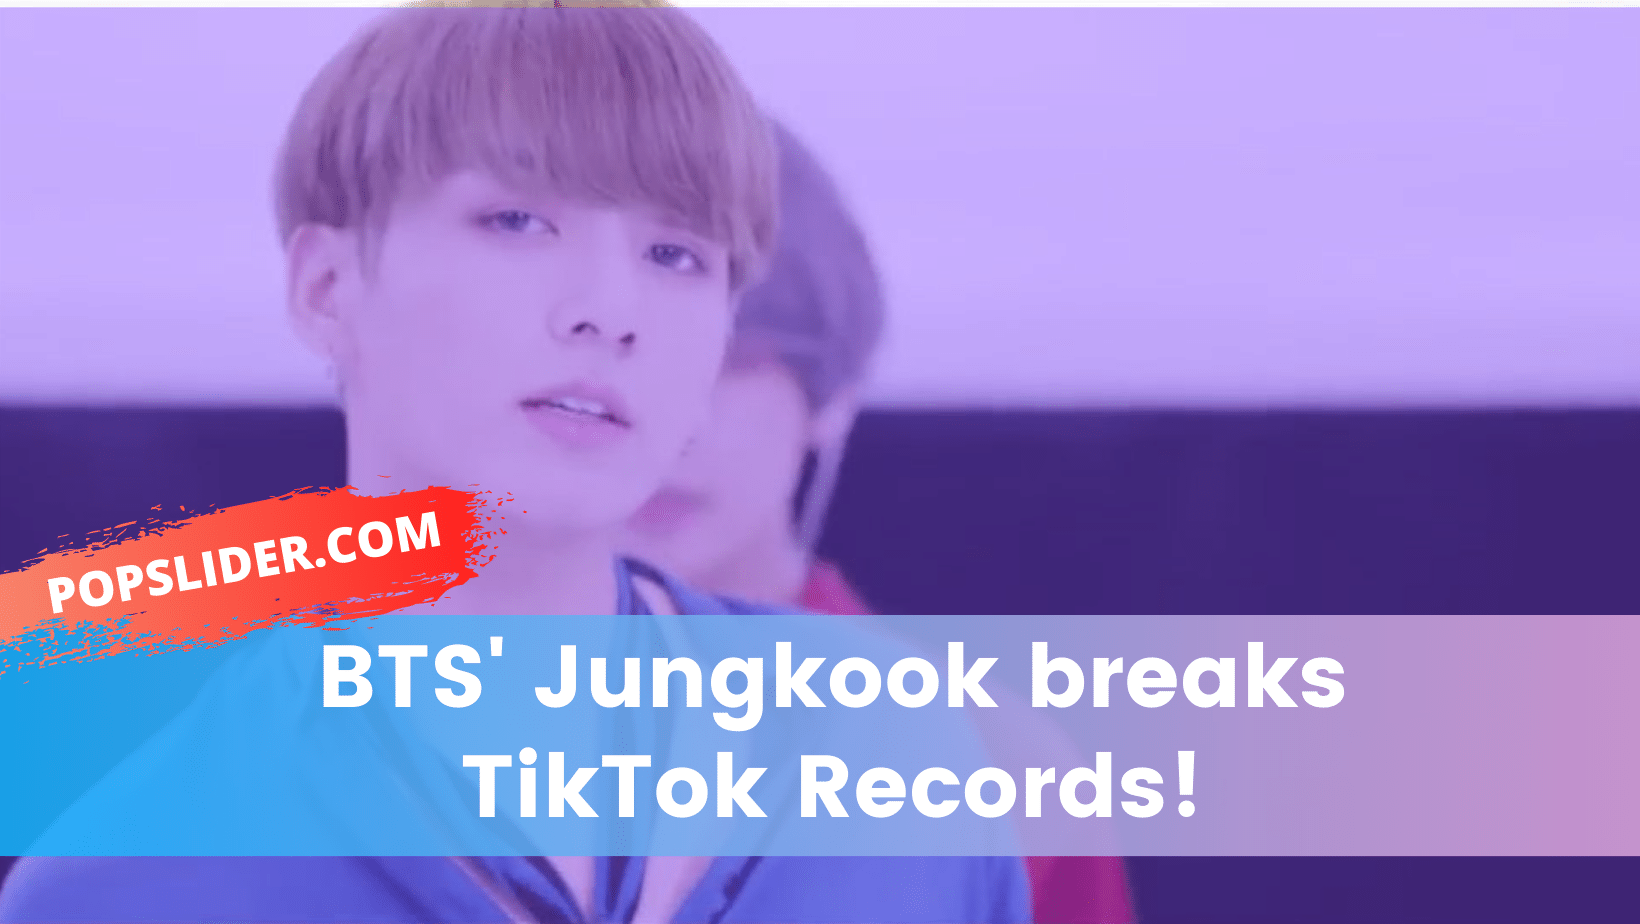 Jungkook Breaks record for most views on Tiktok